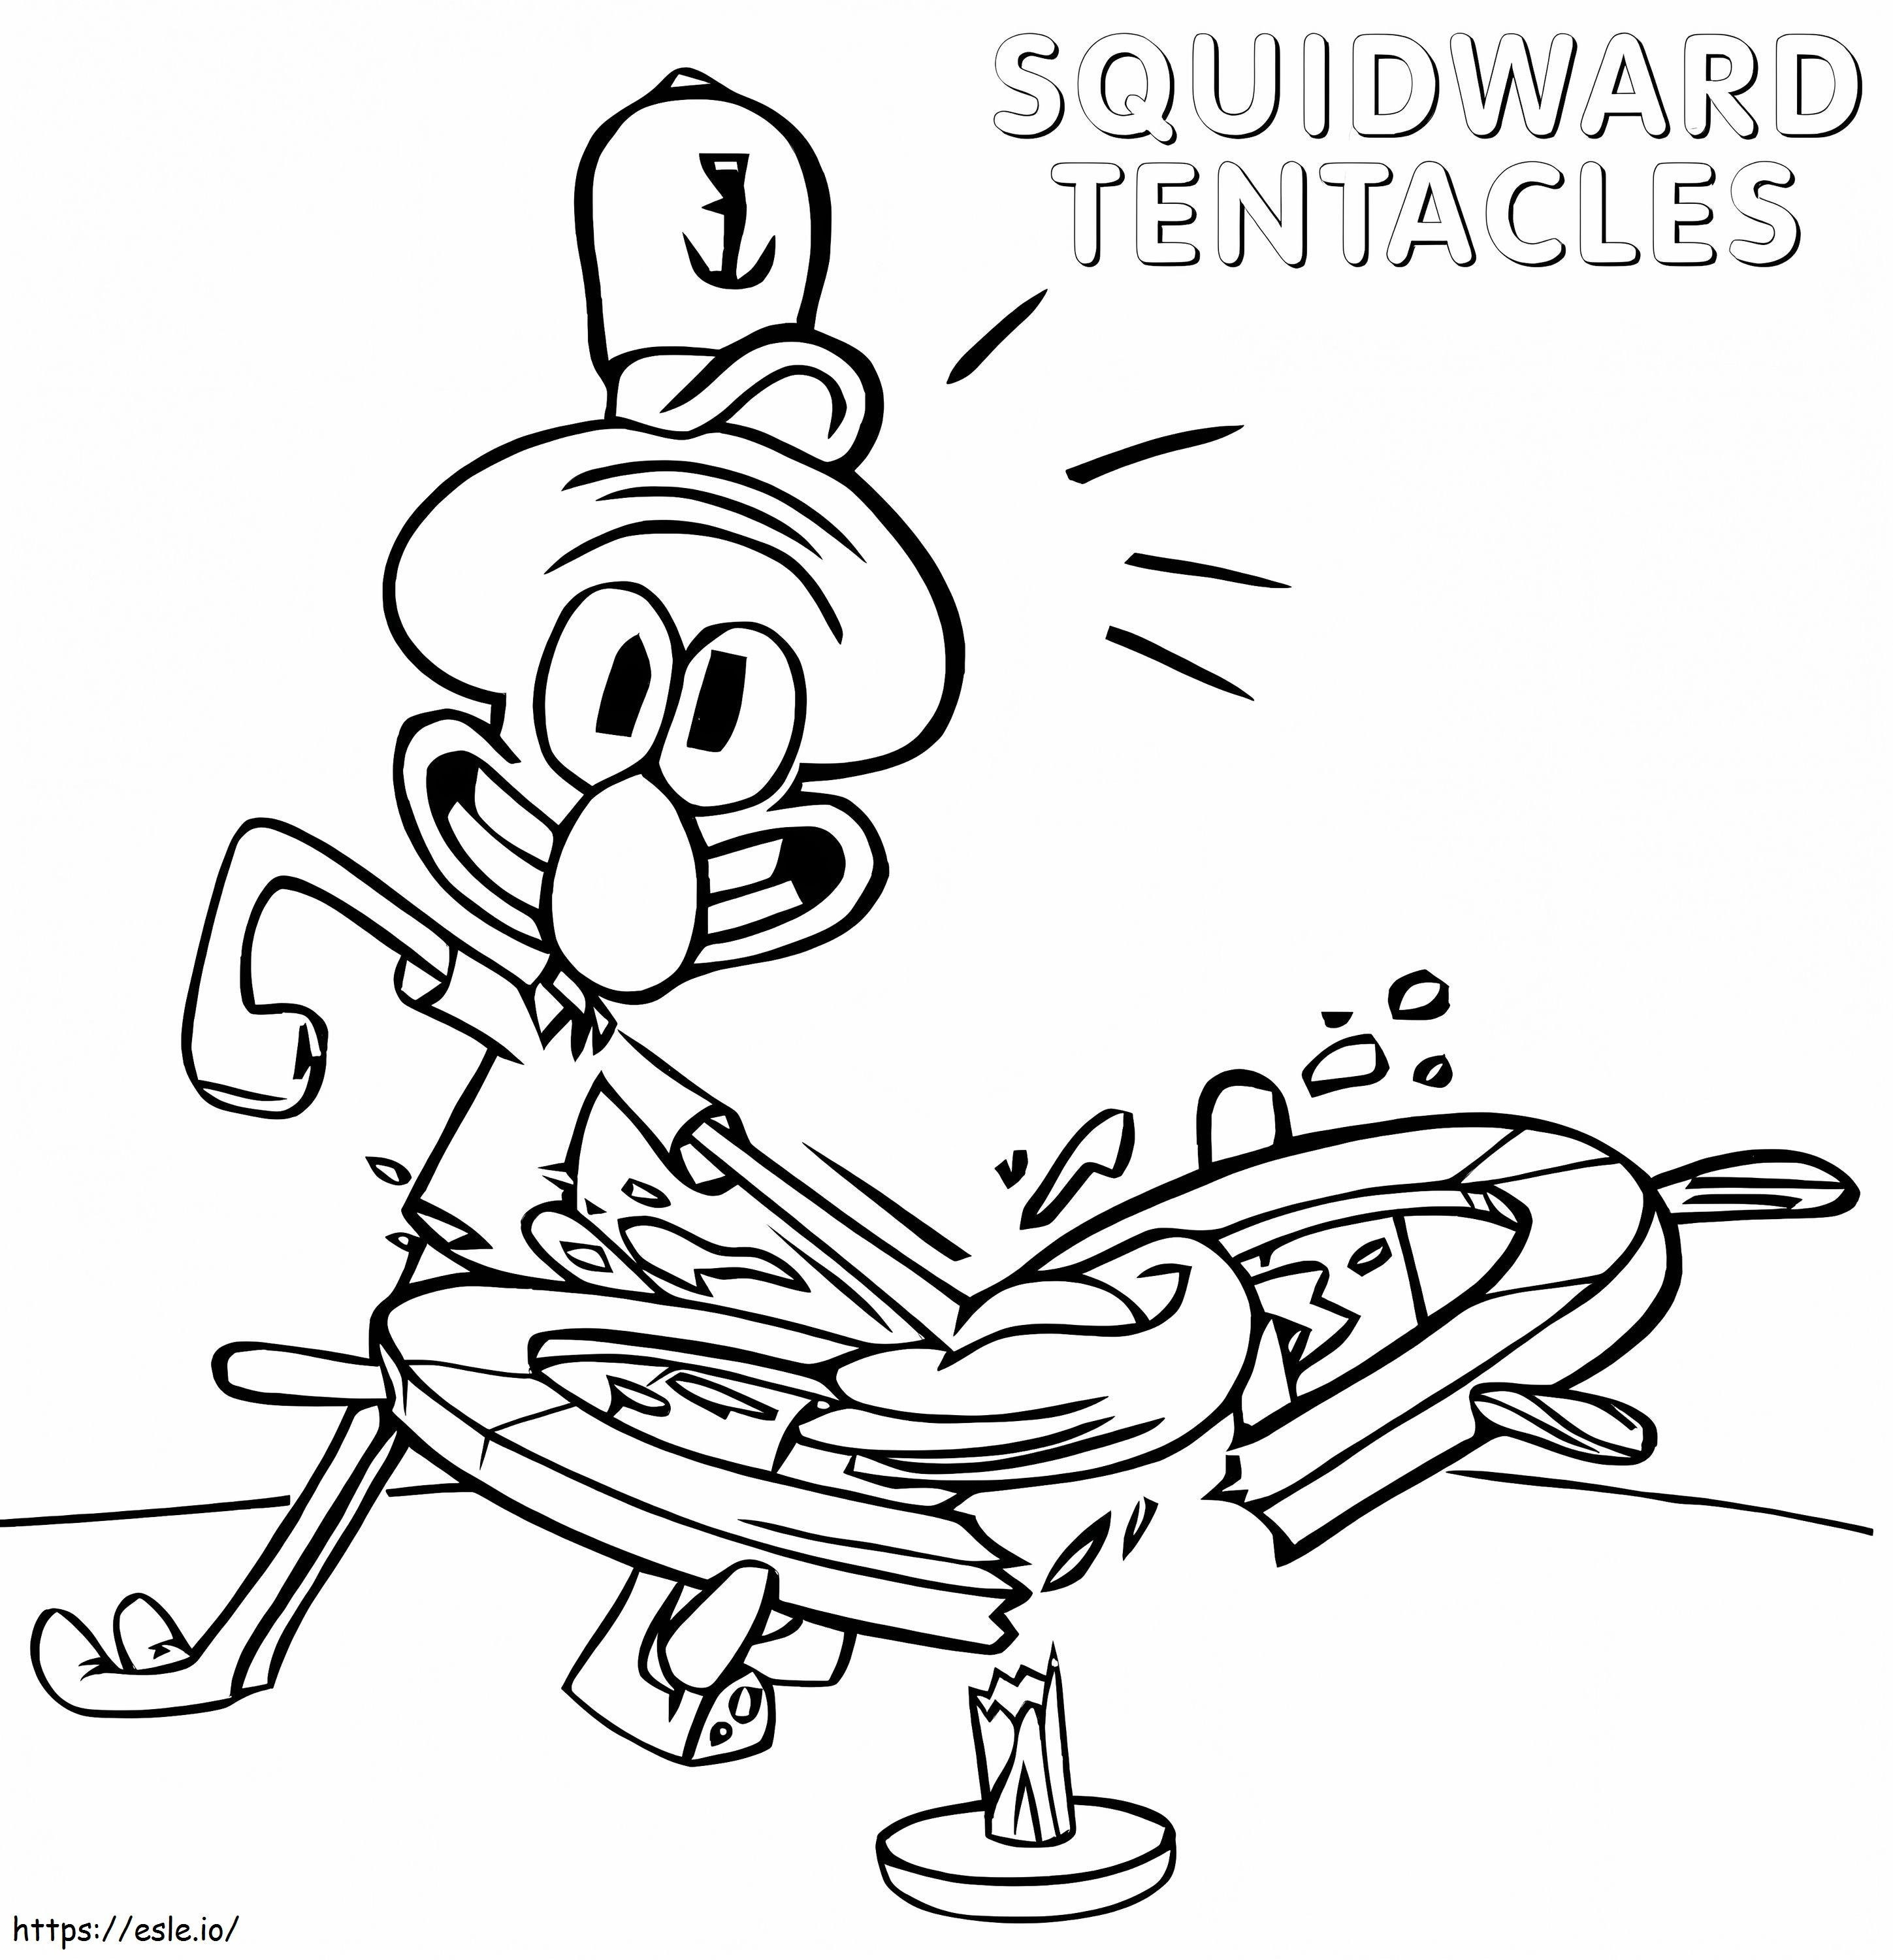 Funny Squidward Tentacles coloring page